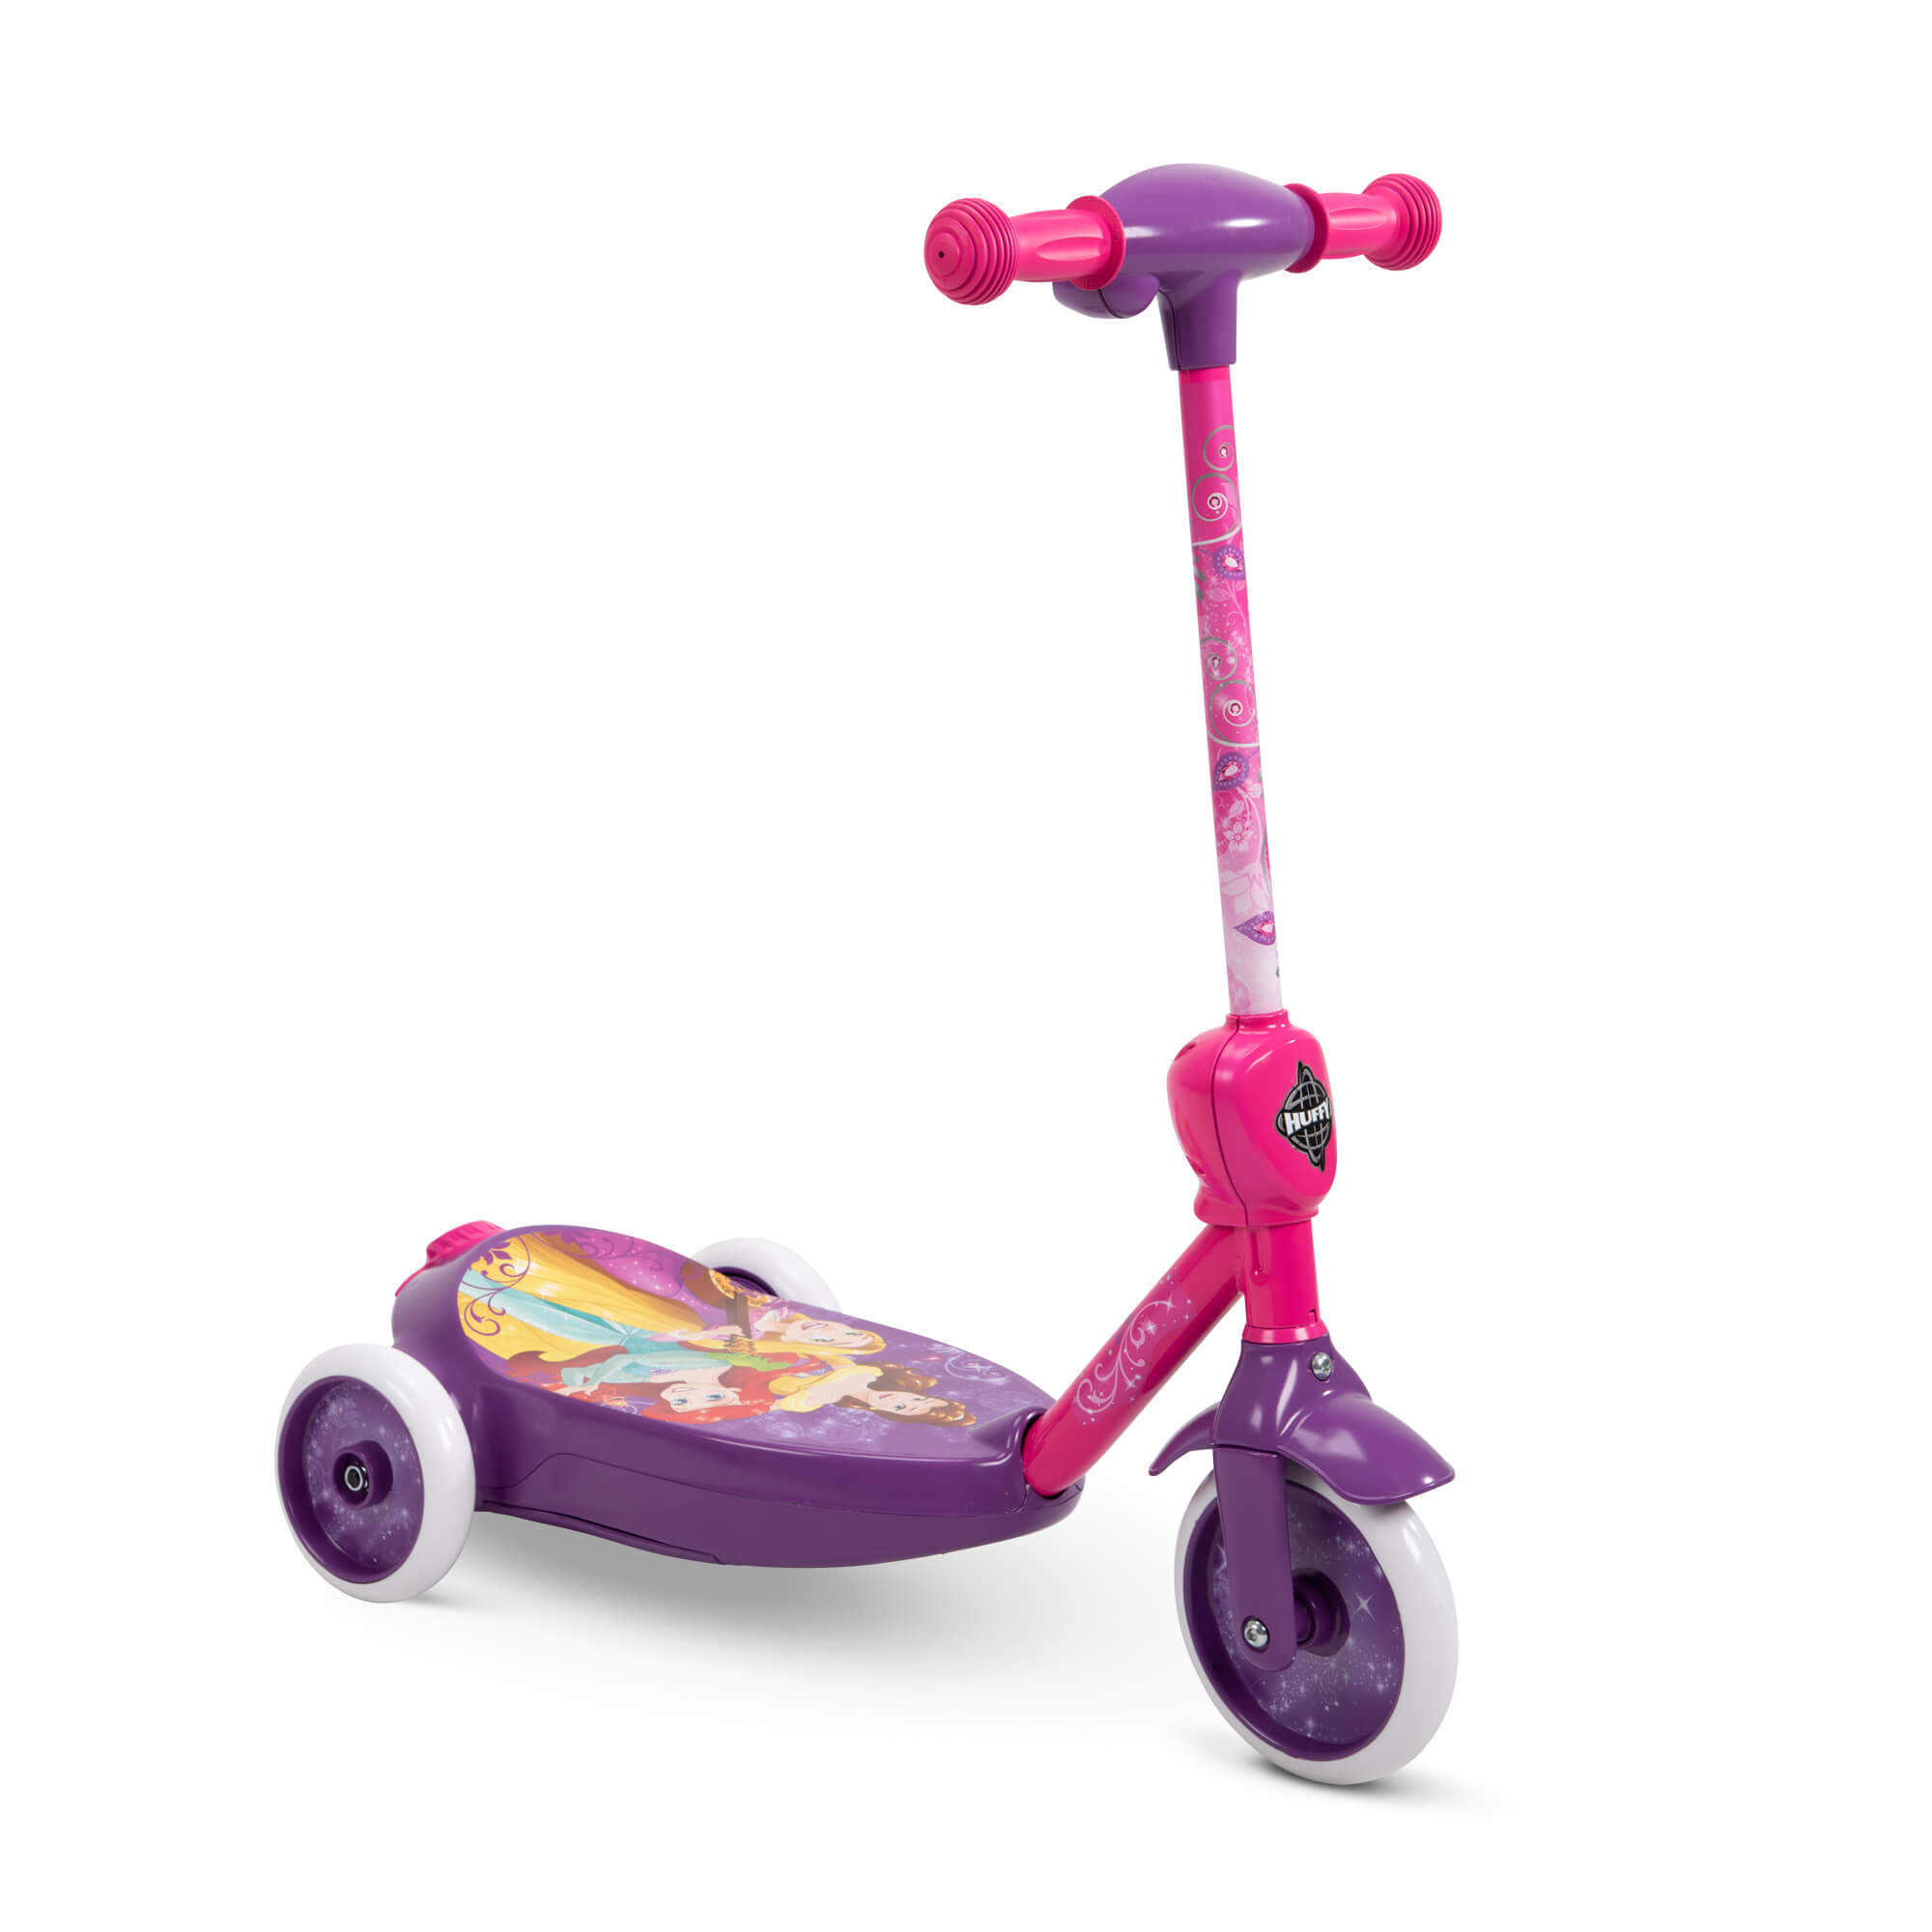 Disney Princess 6V 3-Wheel Electric Ride-On Bubble Scooter for Kids' - image 2 of 8